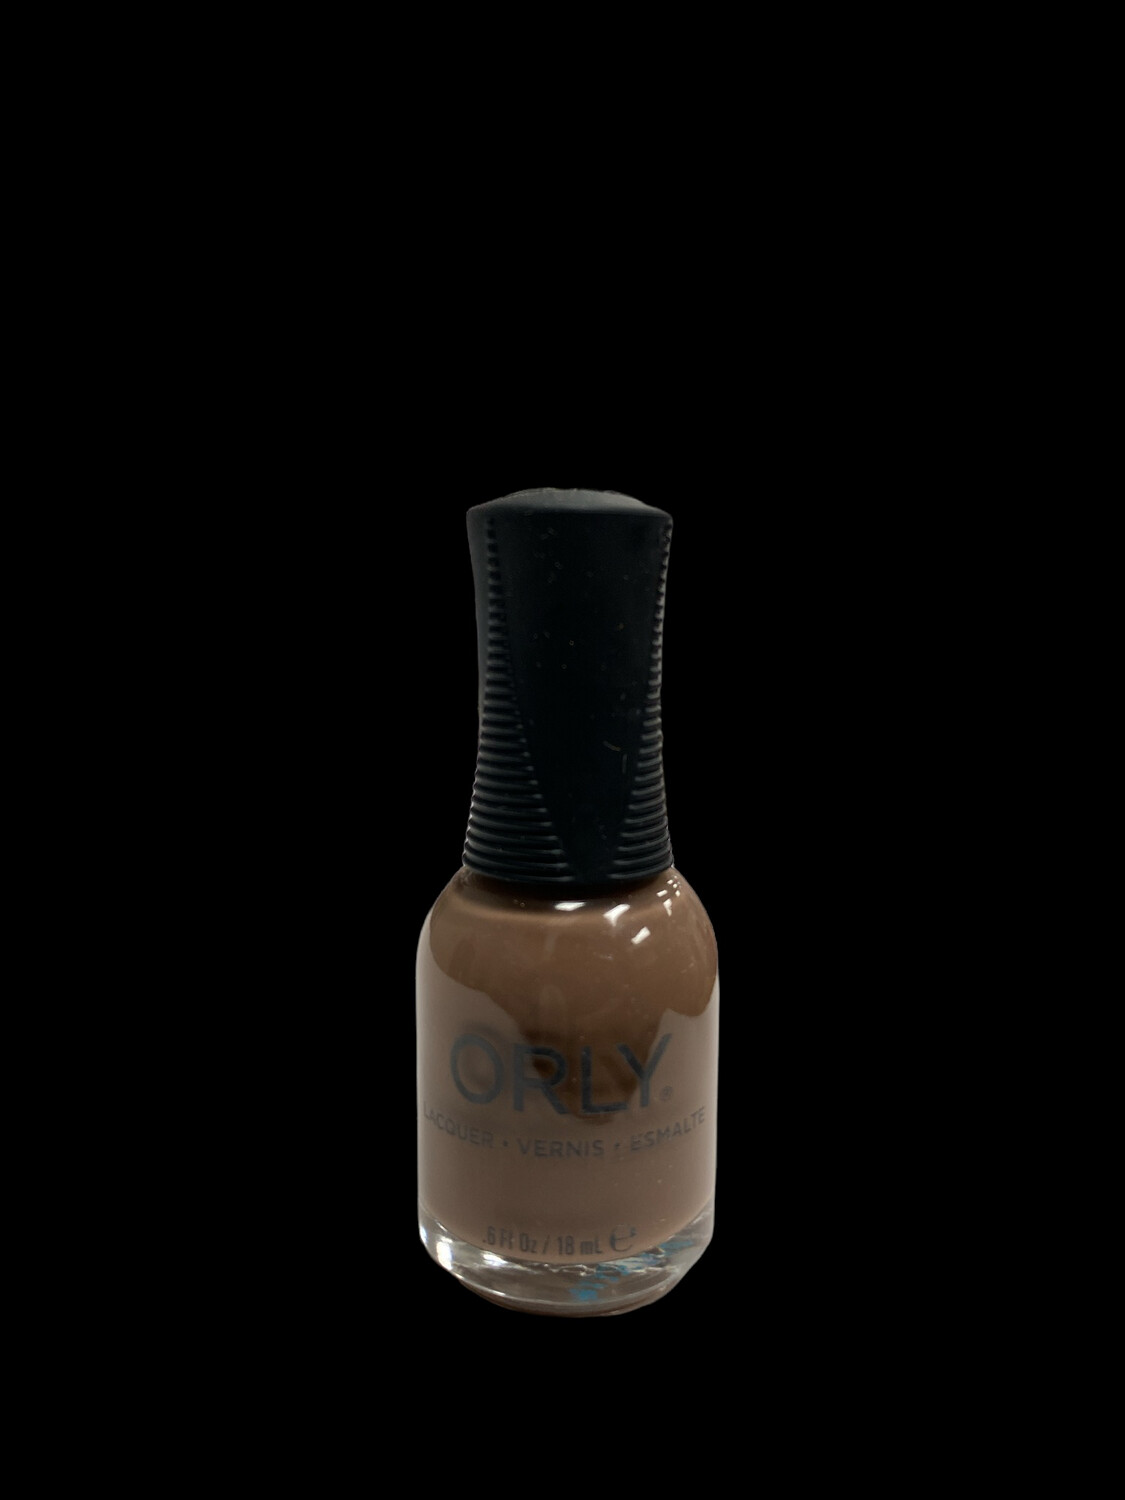 Orly Lacquer Prince Charming .6oz